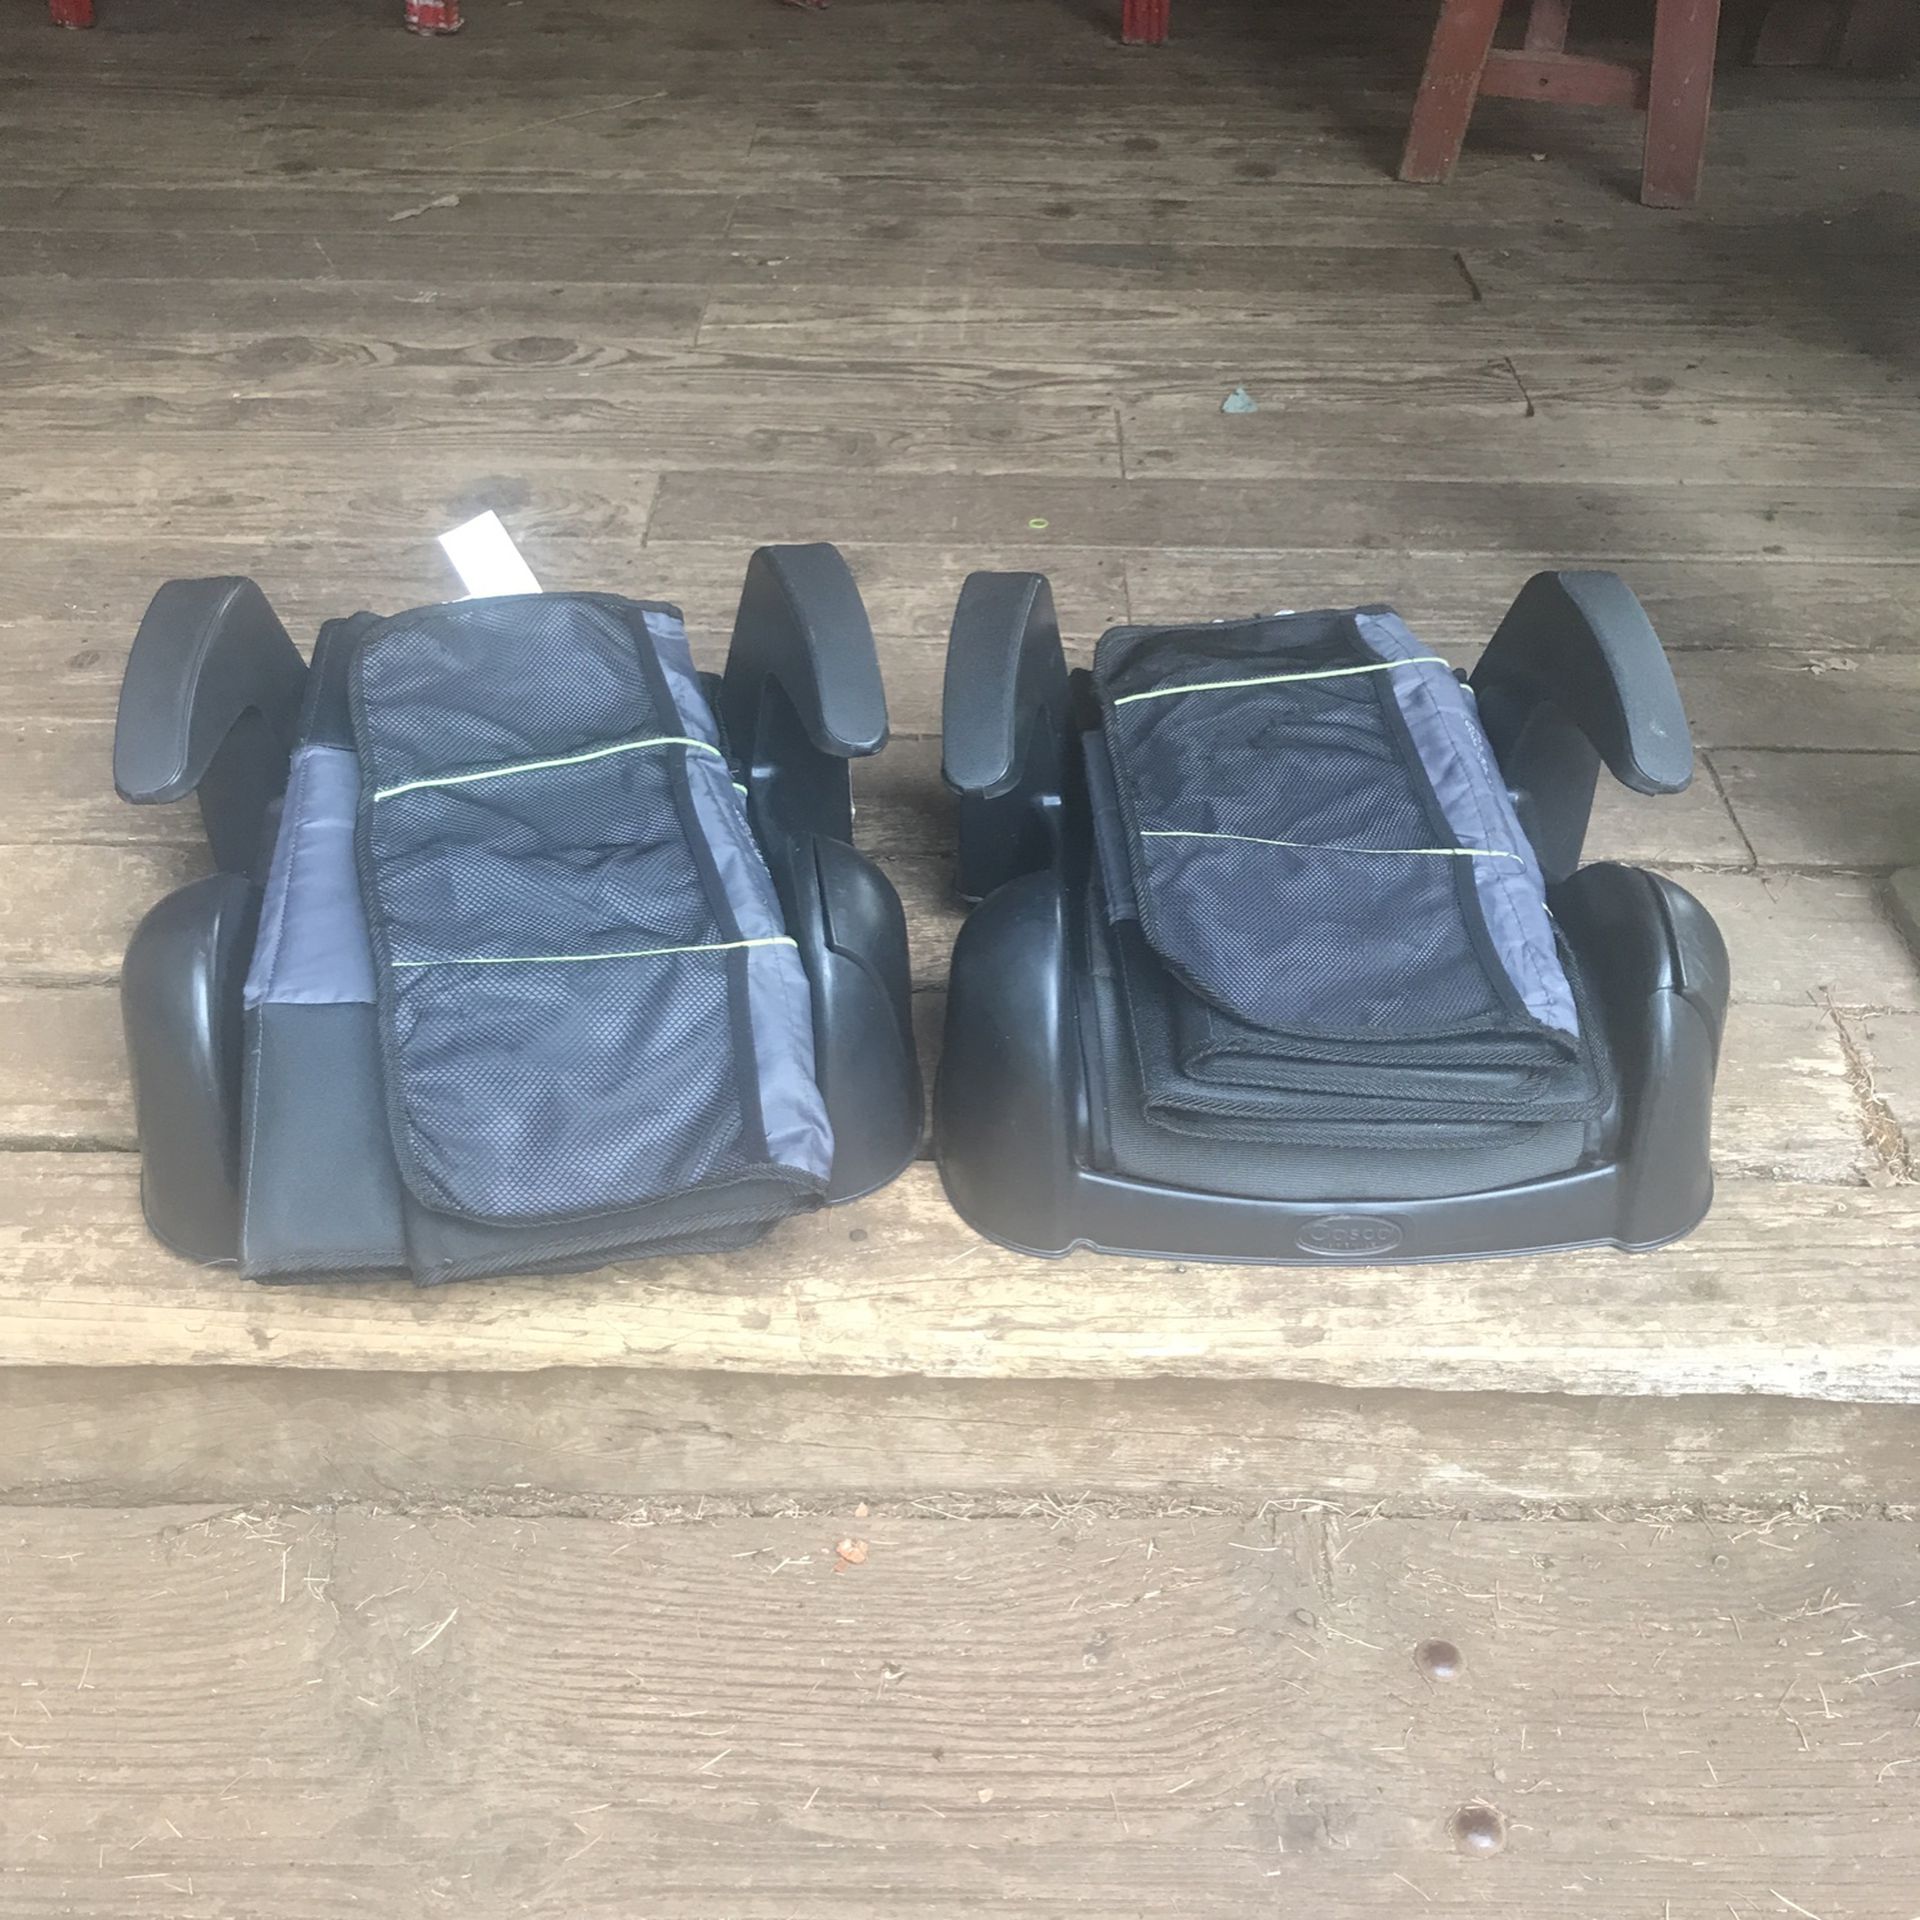 2 Cosco Childs Booster Chairs With Seat Protectors